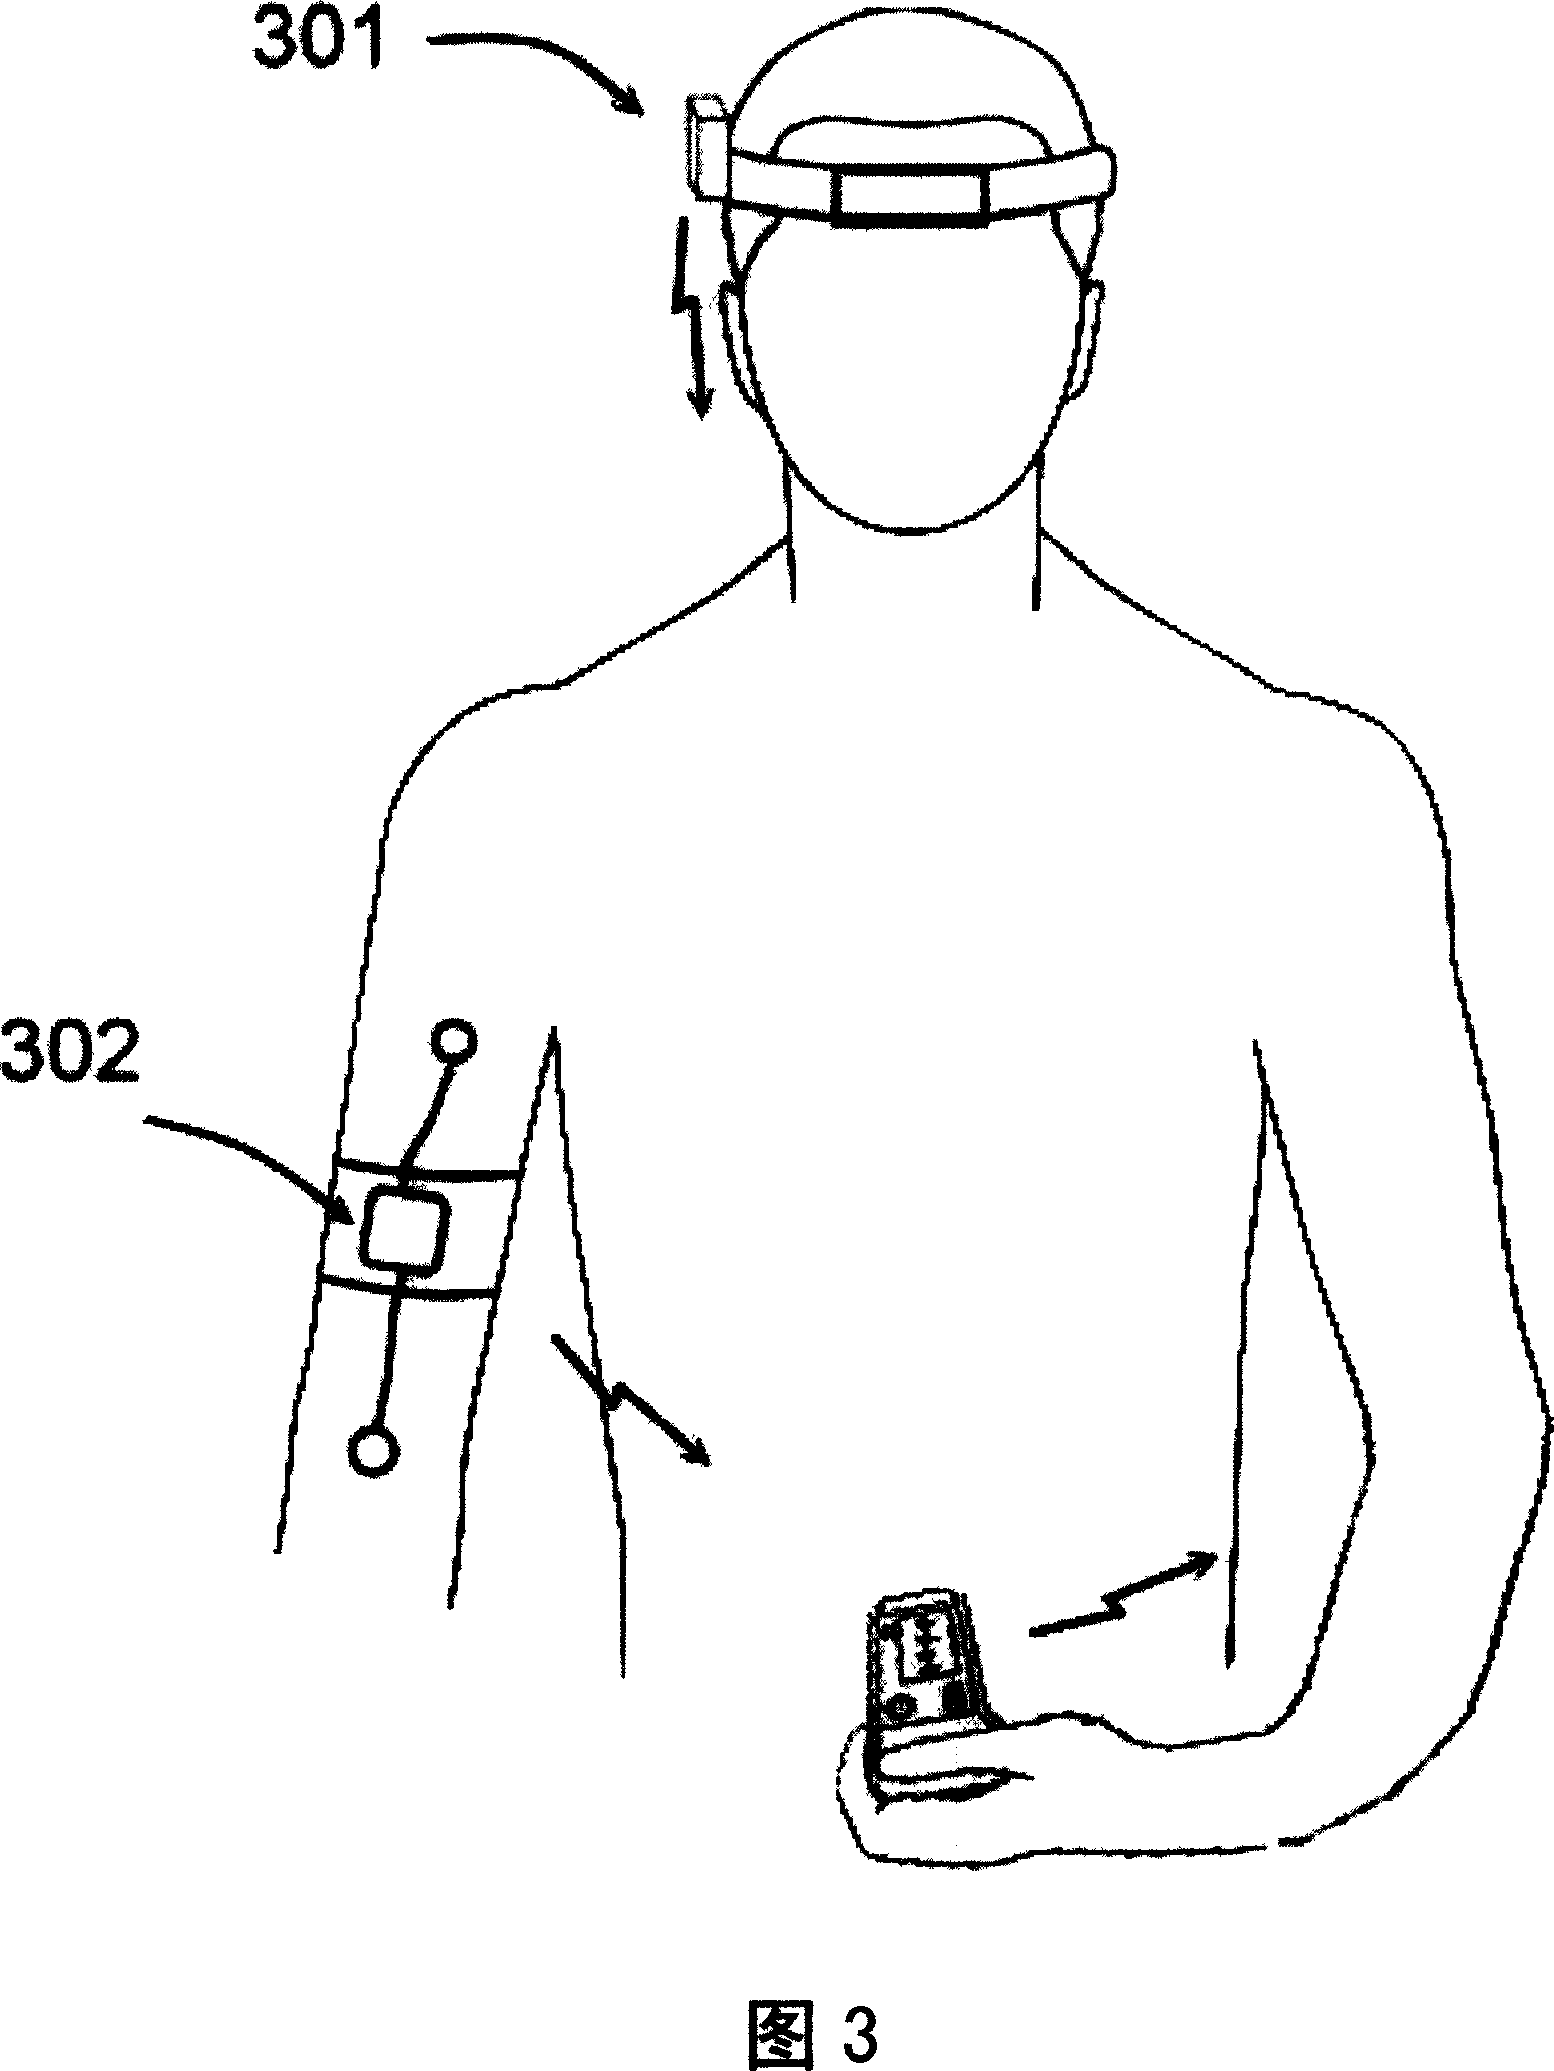 Portable wireless device for monitoring physiological signals